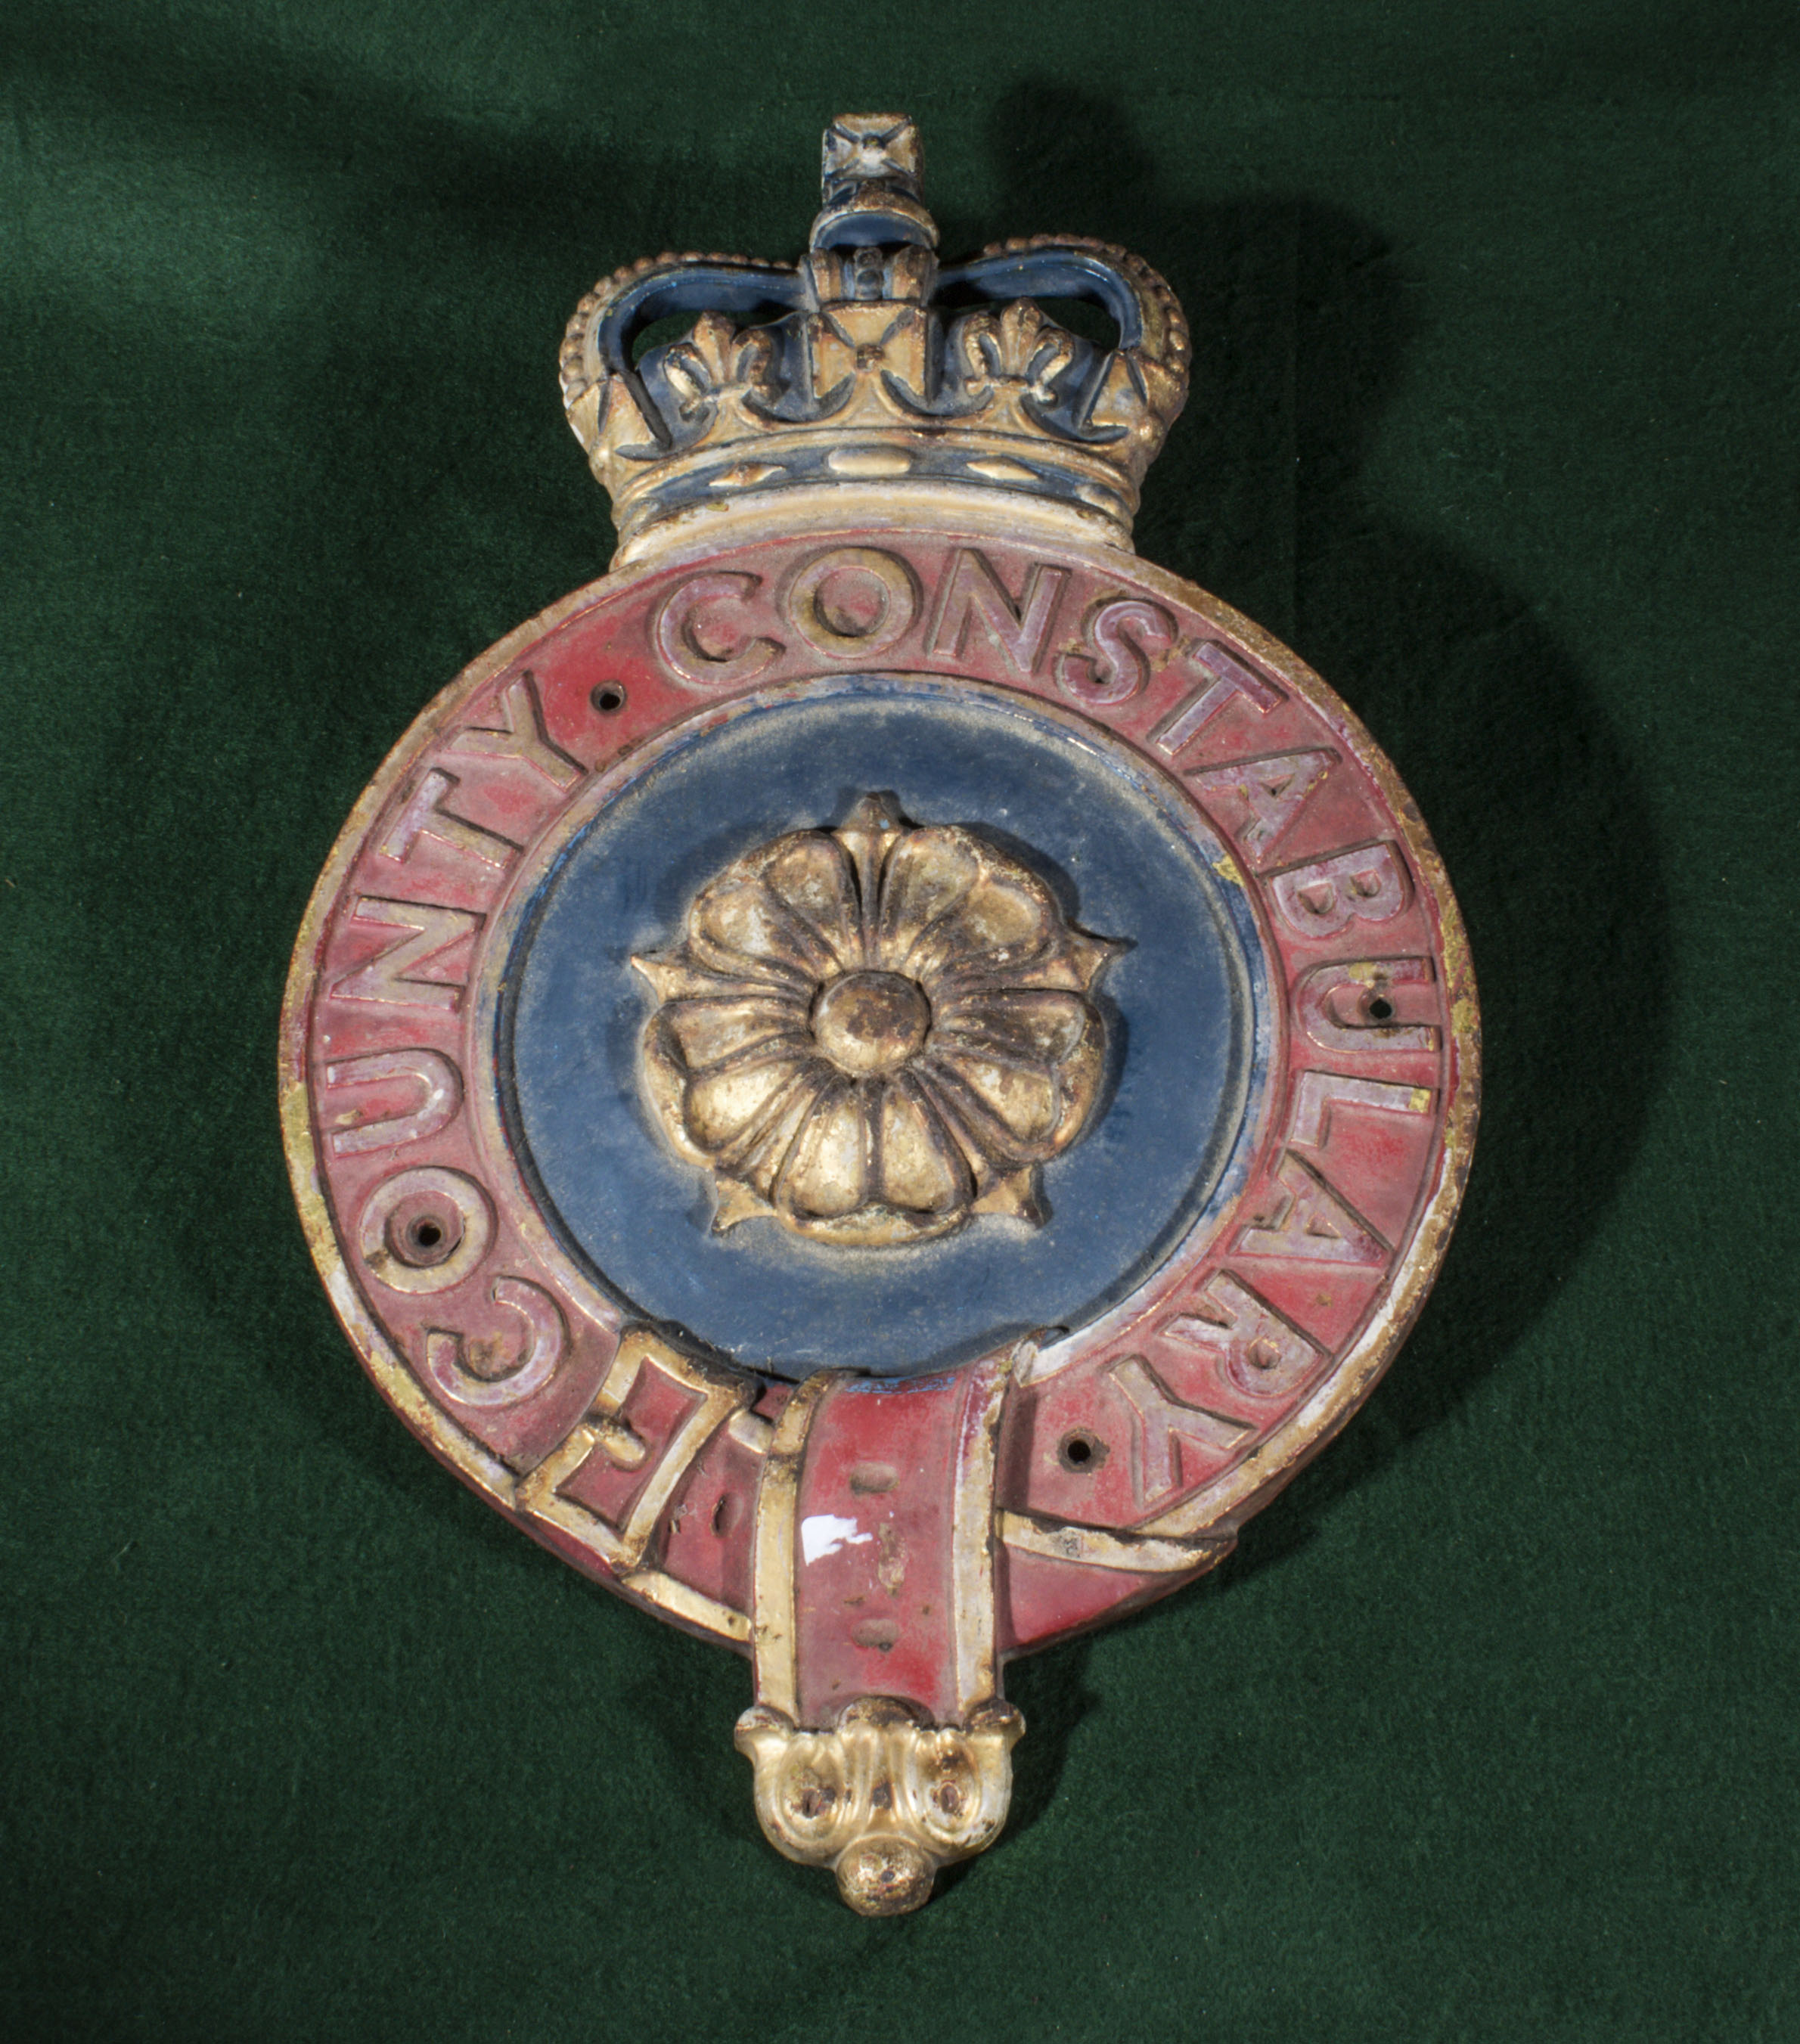 A County Constabulary wall plaque